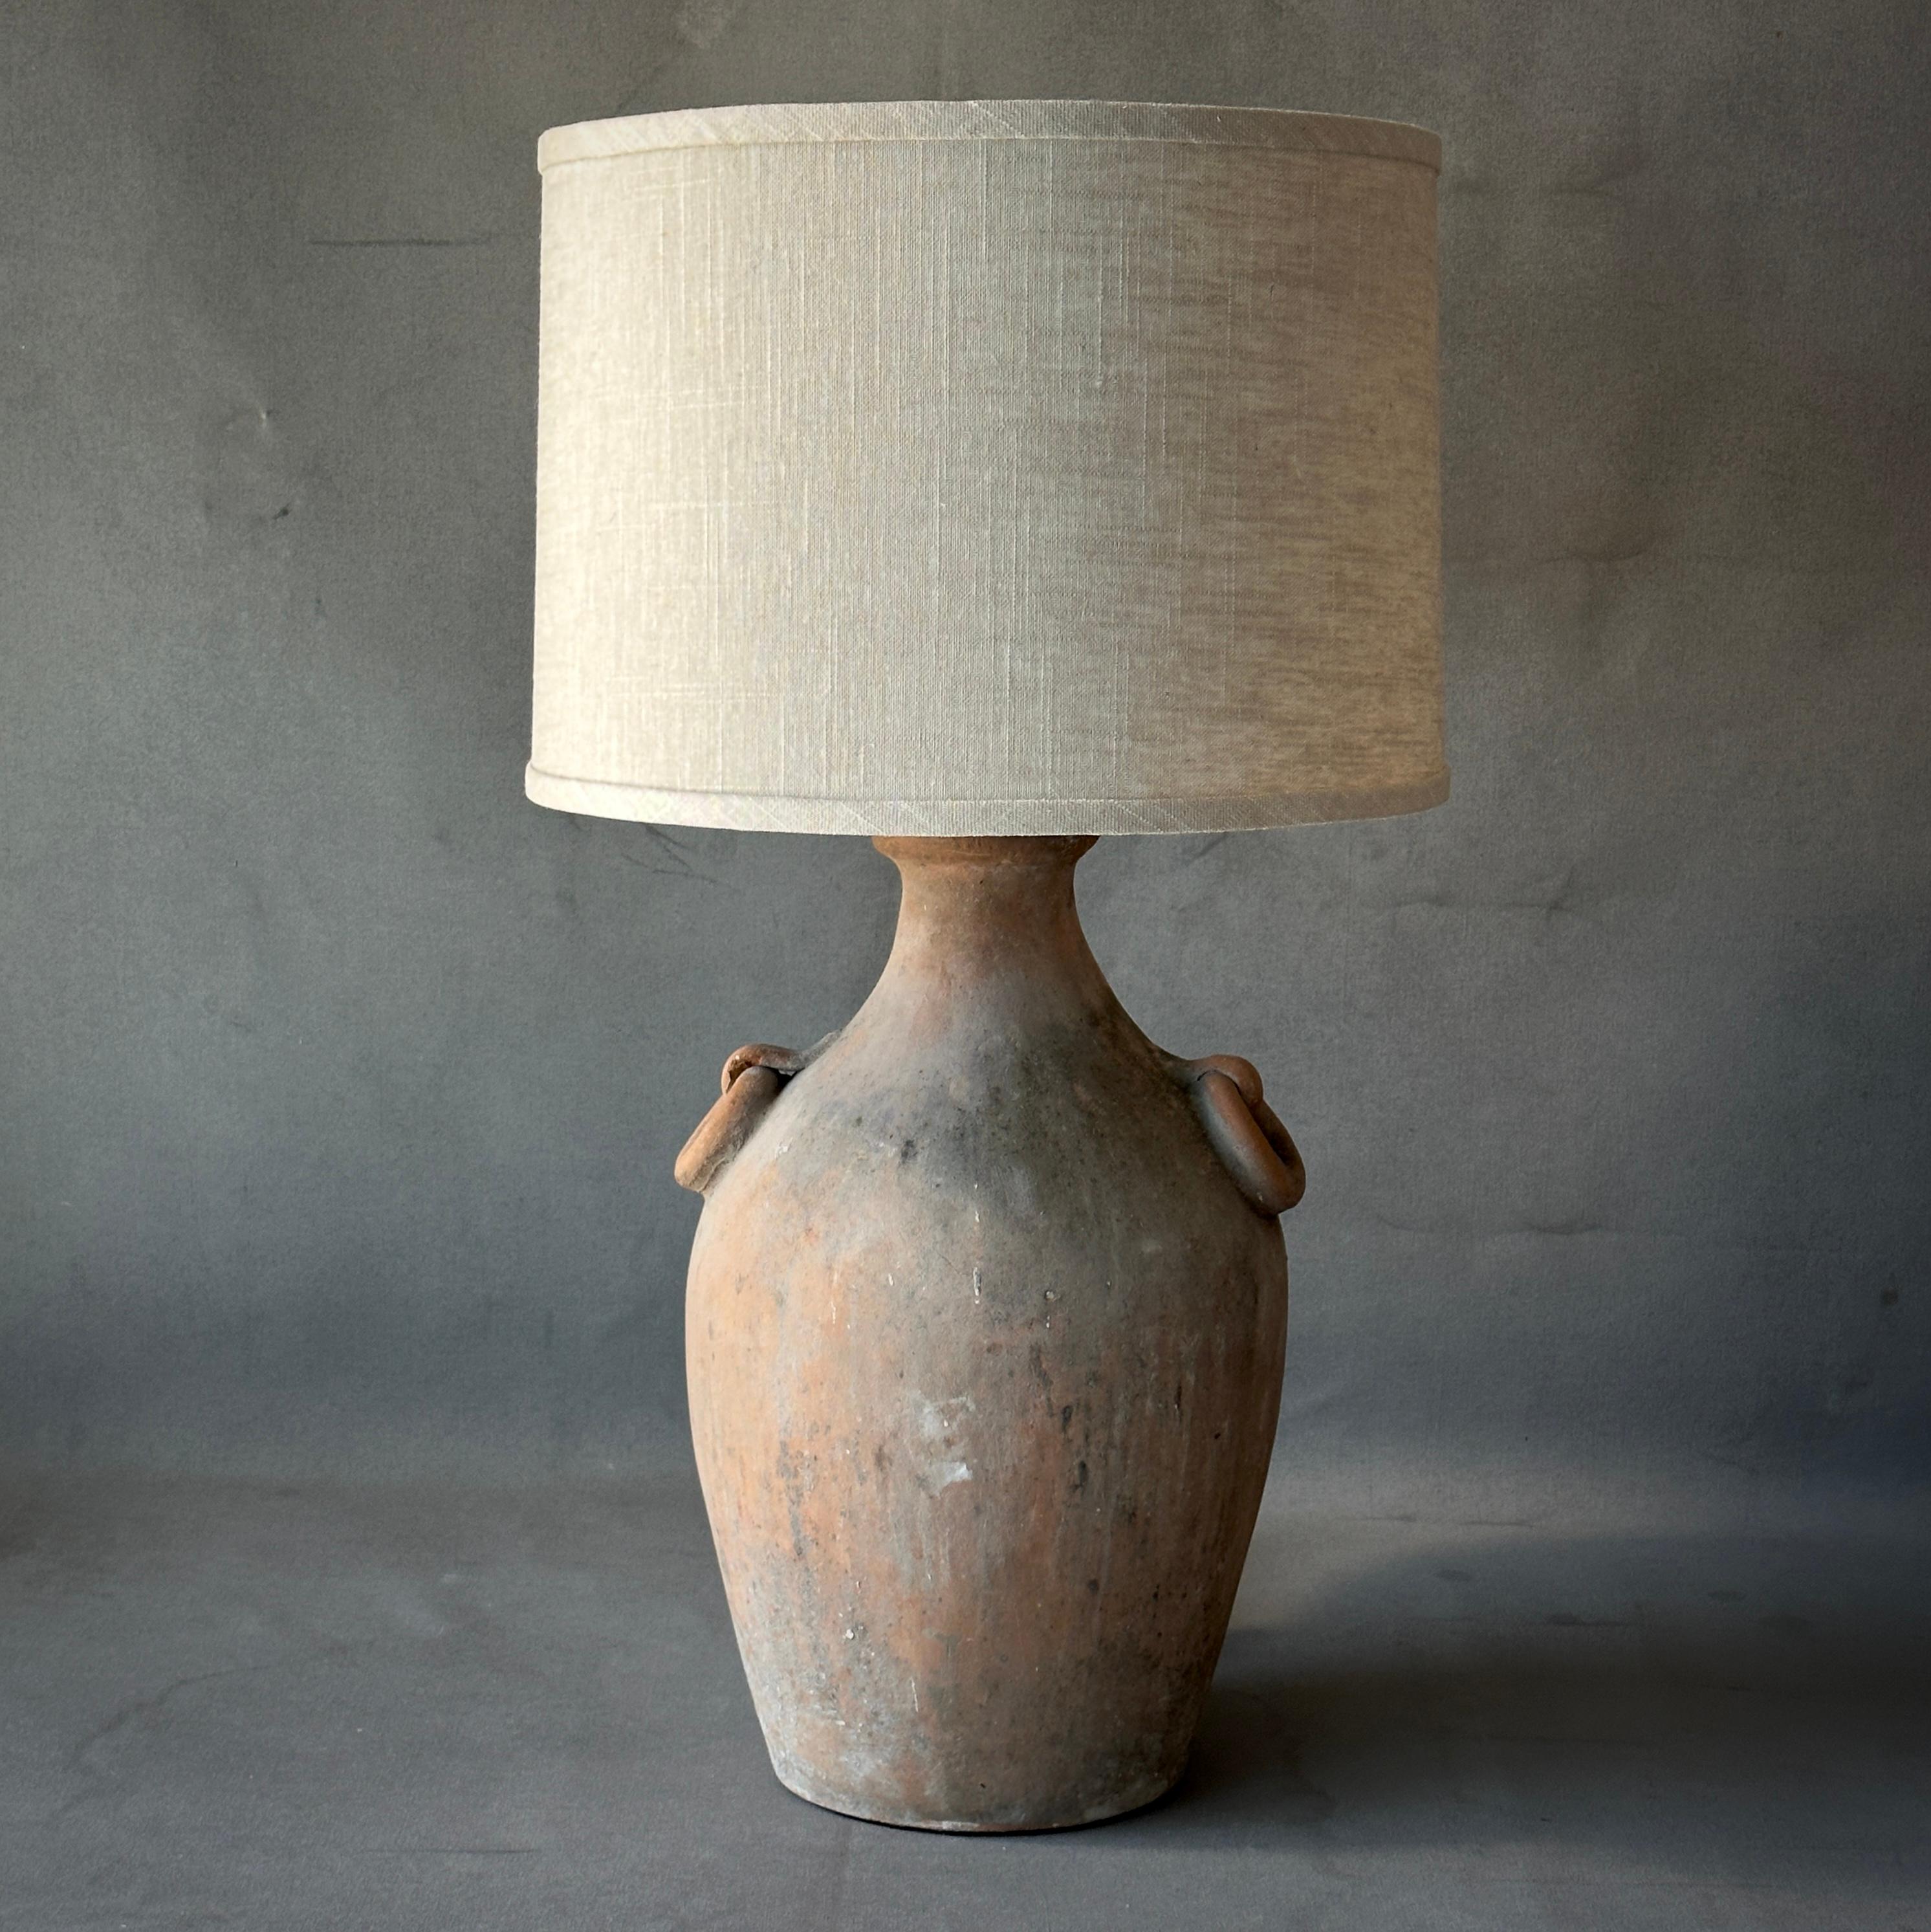 Lencho is a mossy terra-cotta vessel as lamp with an earthy, handmade appeal.

Discovered at an abandoned potters studio in the Jalisco, Mexico.

Lencho
Mexico, 1985
